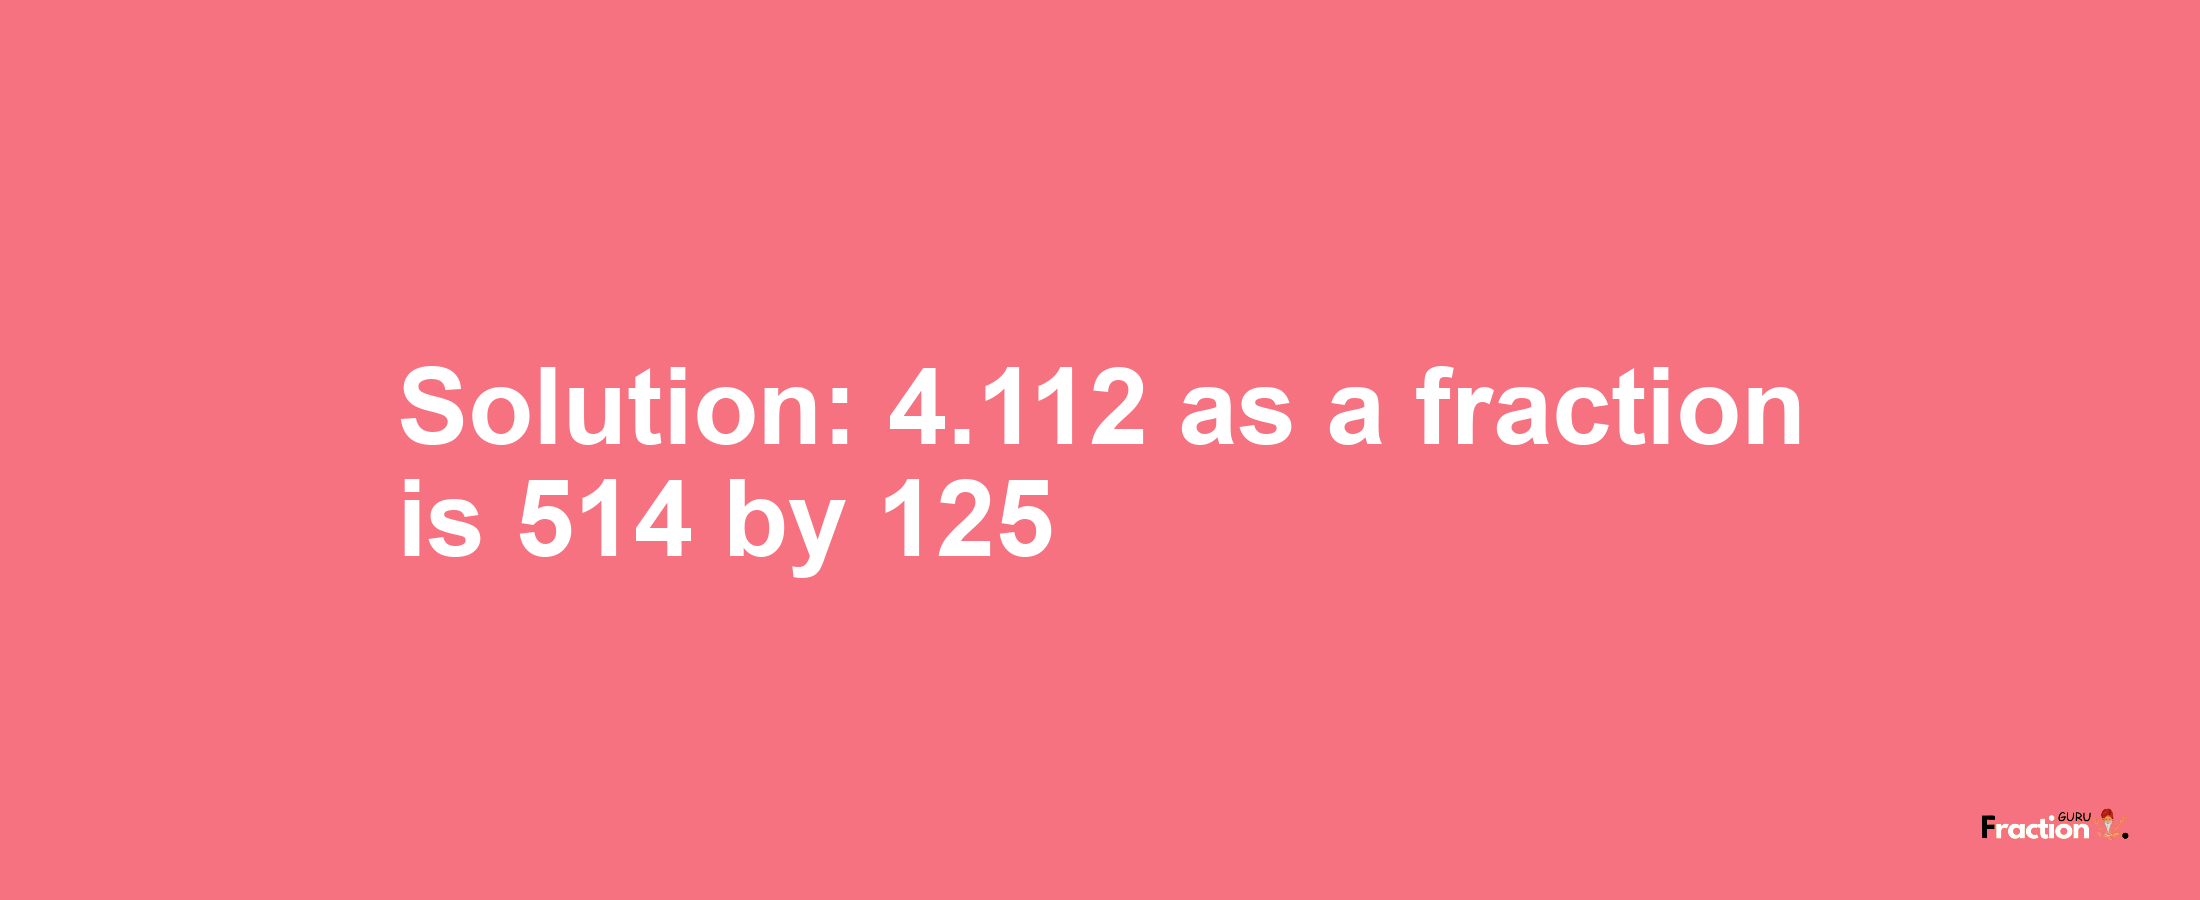 Solution:4.112 as a fraction is 514/125